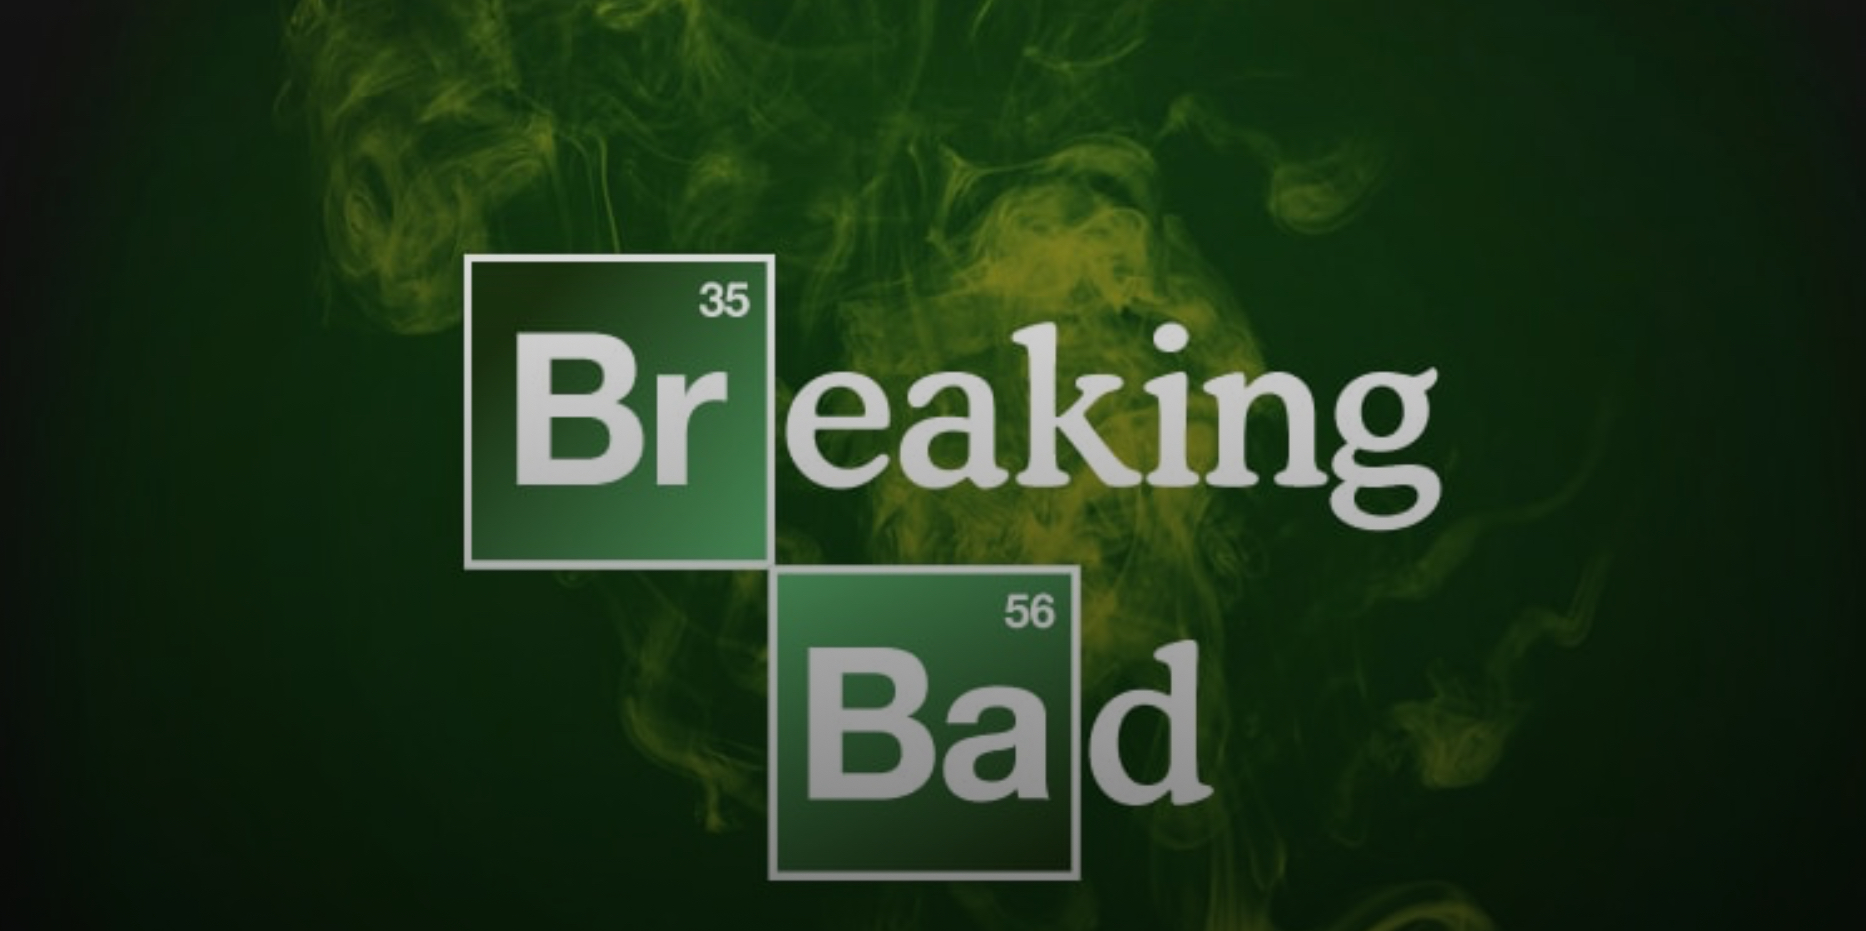 ‘Breaking Bad: Criminal Elements’ Is a Free to Play Strategy Focussed Mobile Game Based on ‘Breaking Bad’ Releasing Later This Year